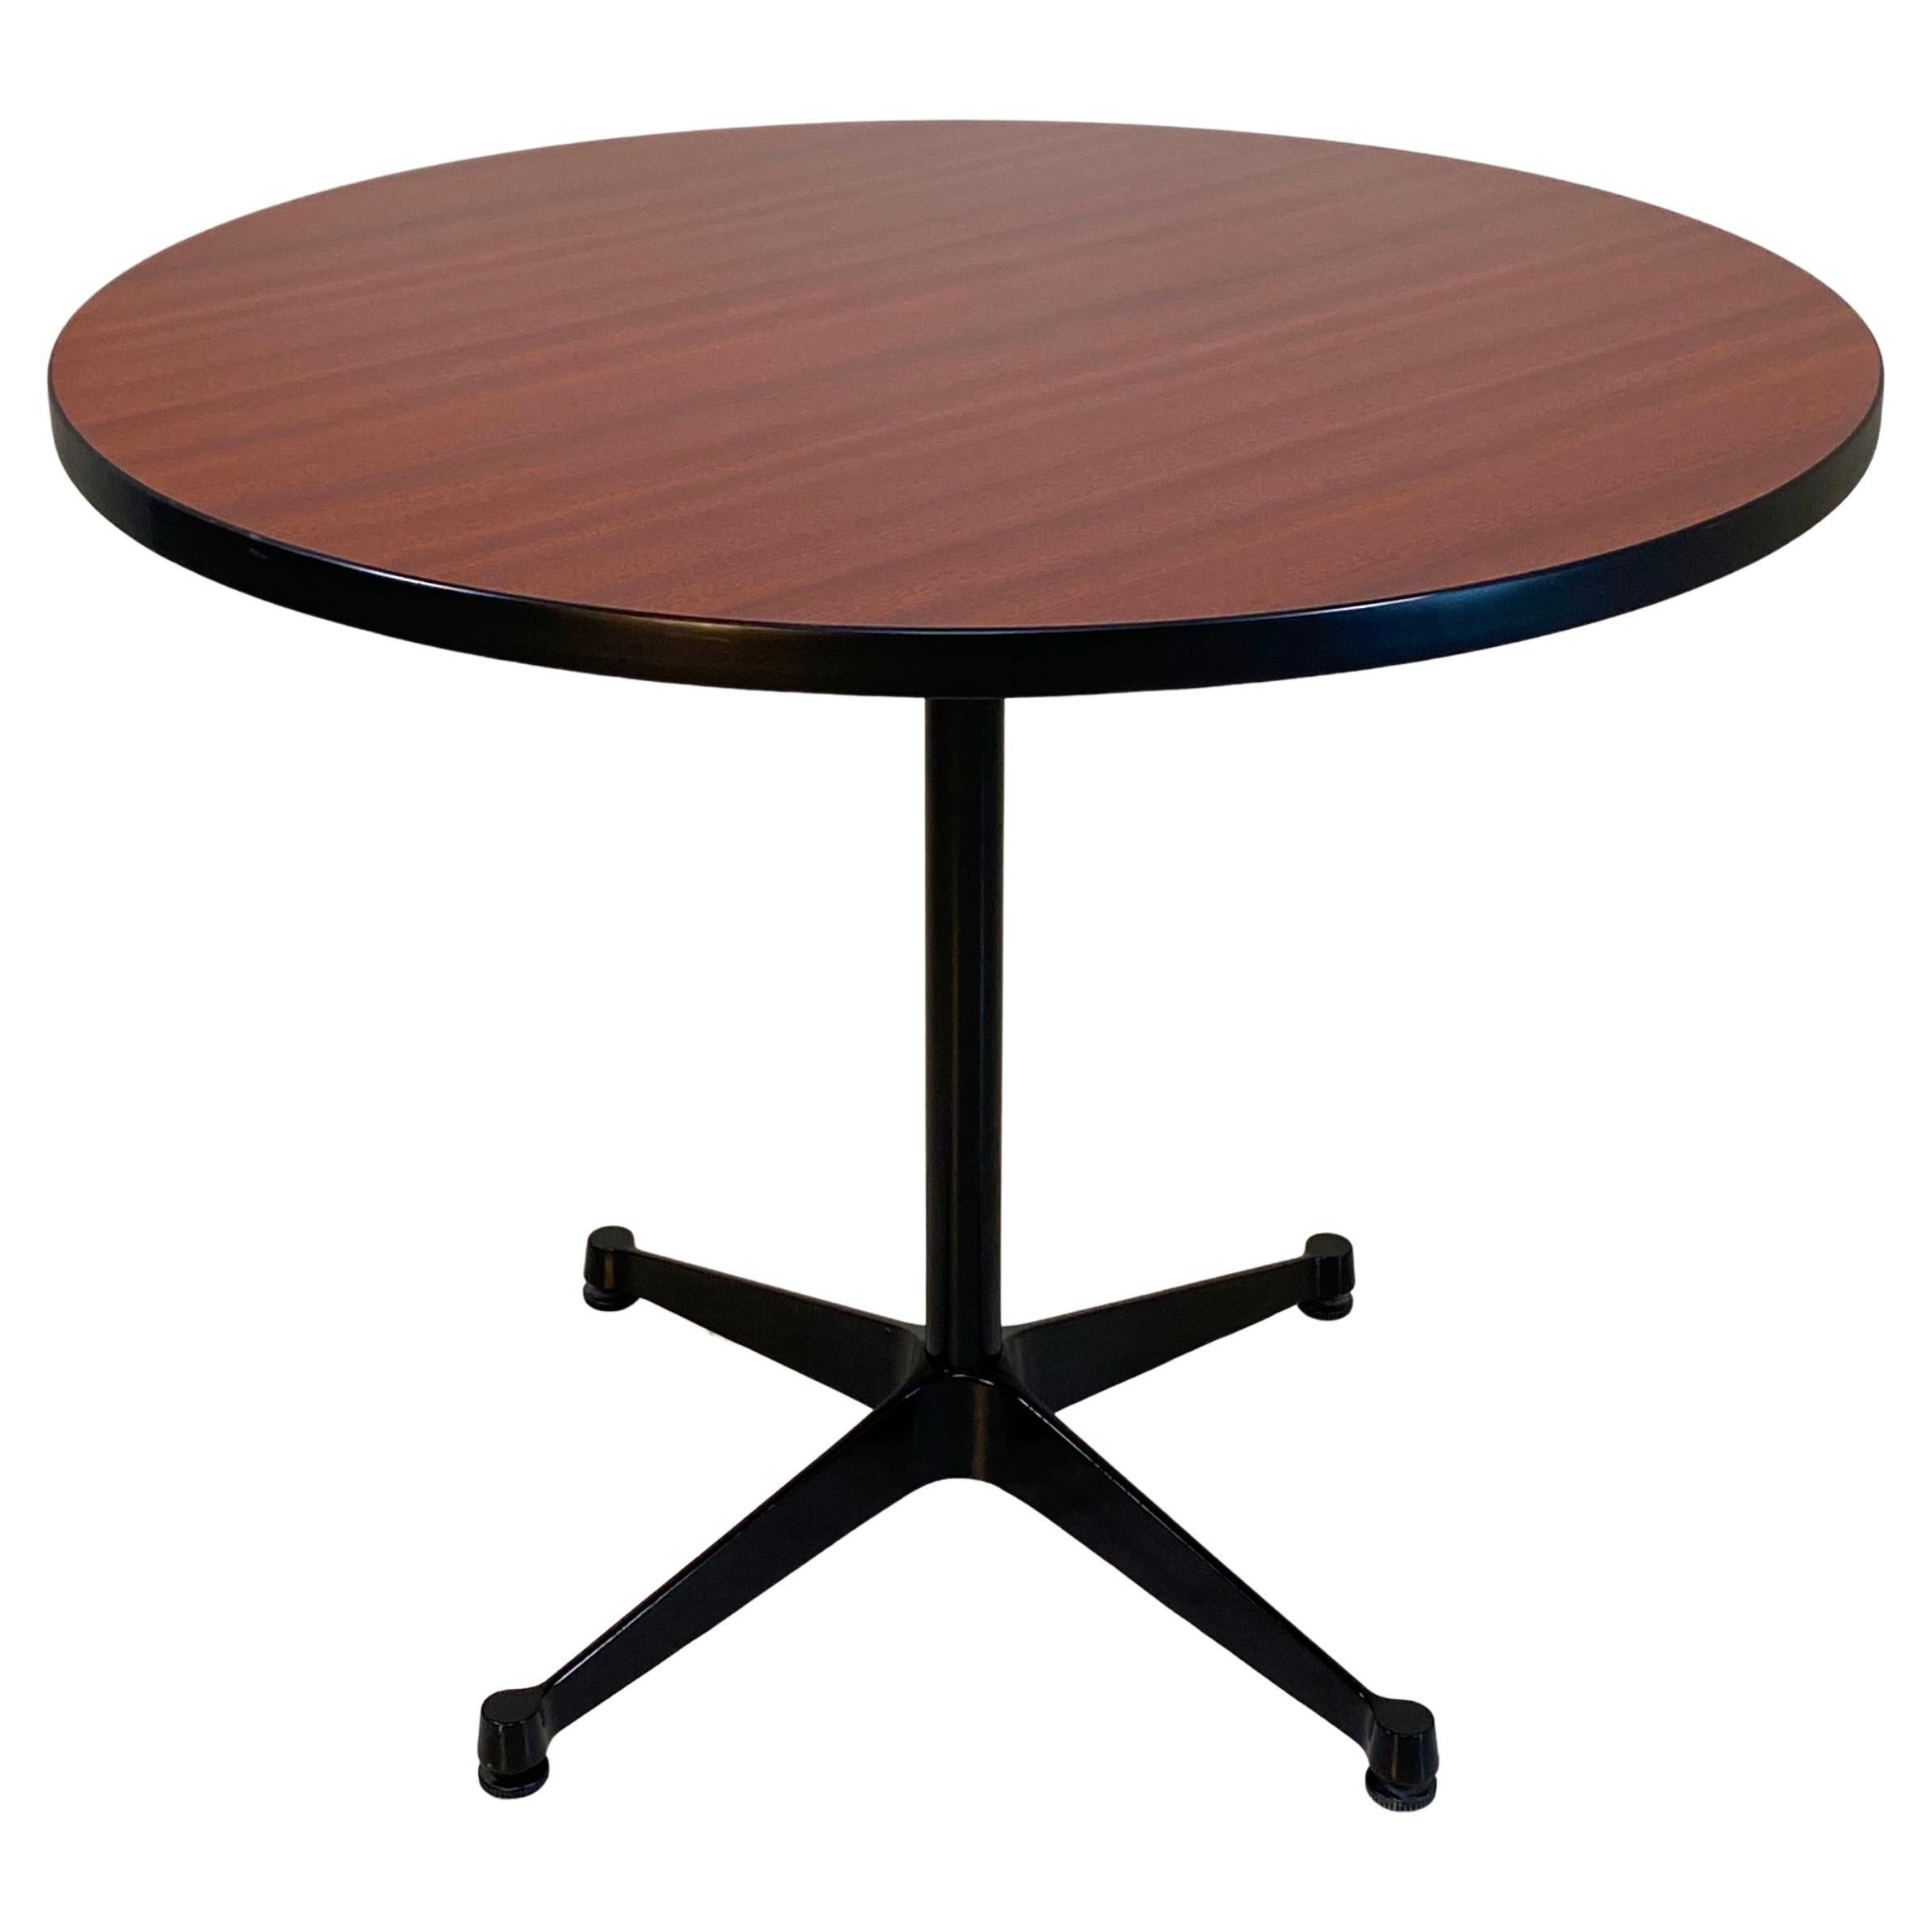 Standing Height Herman Miller Eames Contract Base Table For Sale